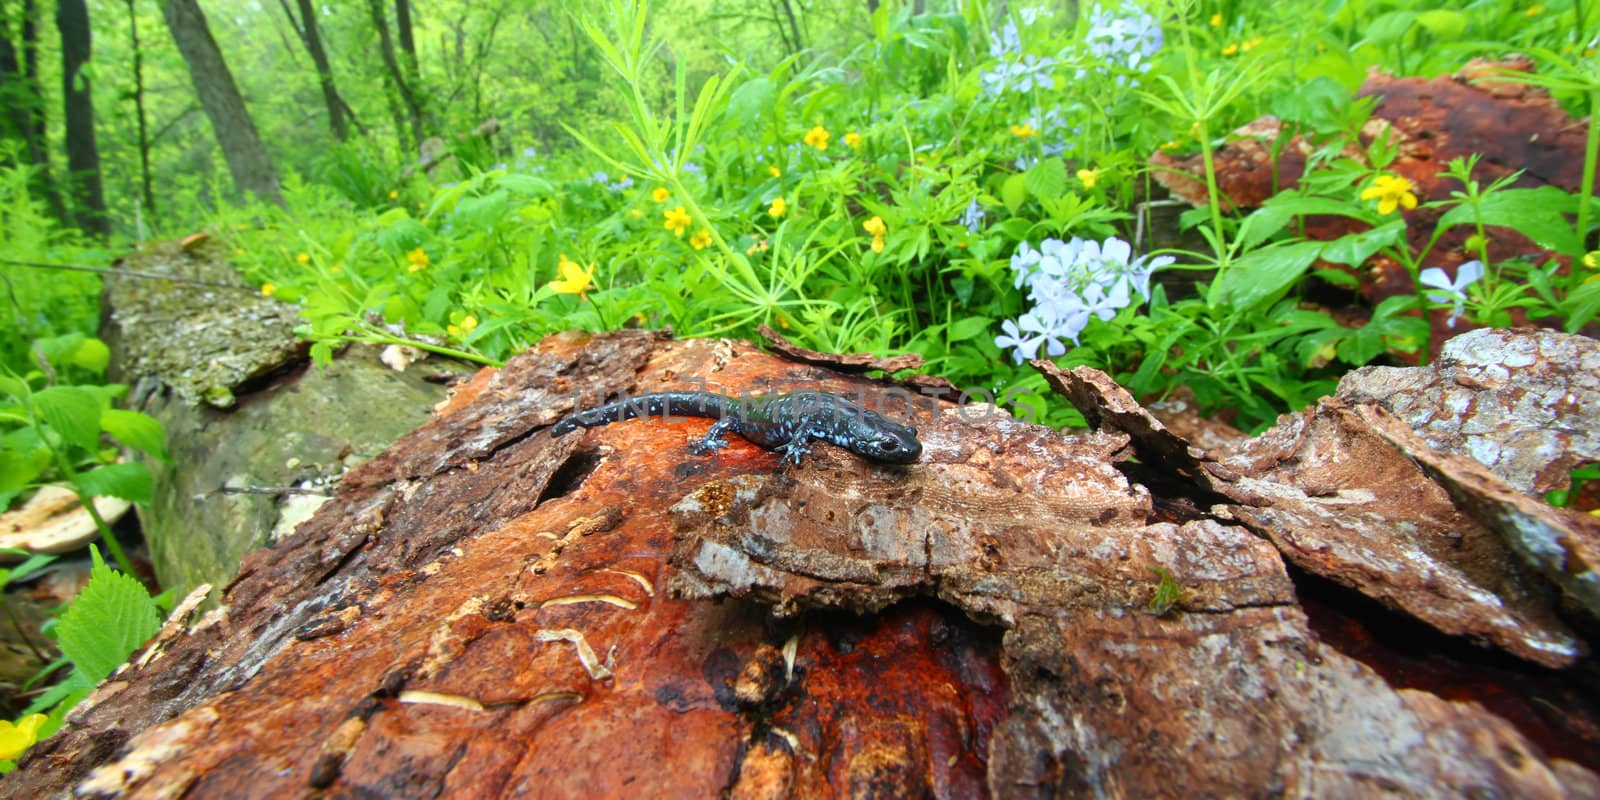 Blue-spotted Salamander (Ambystoma laterale) by Wirepec